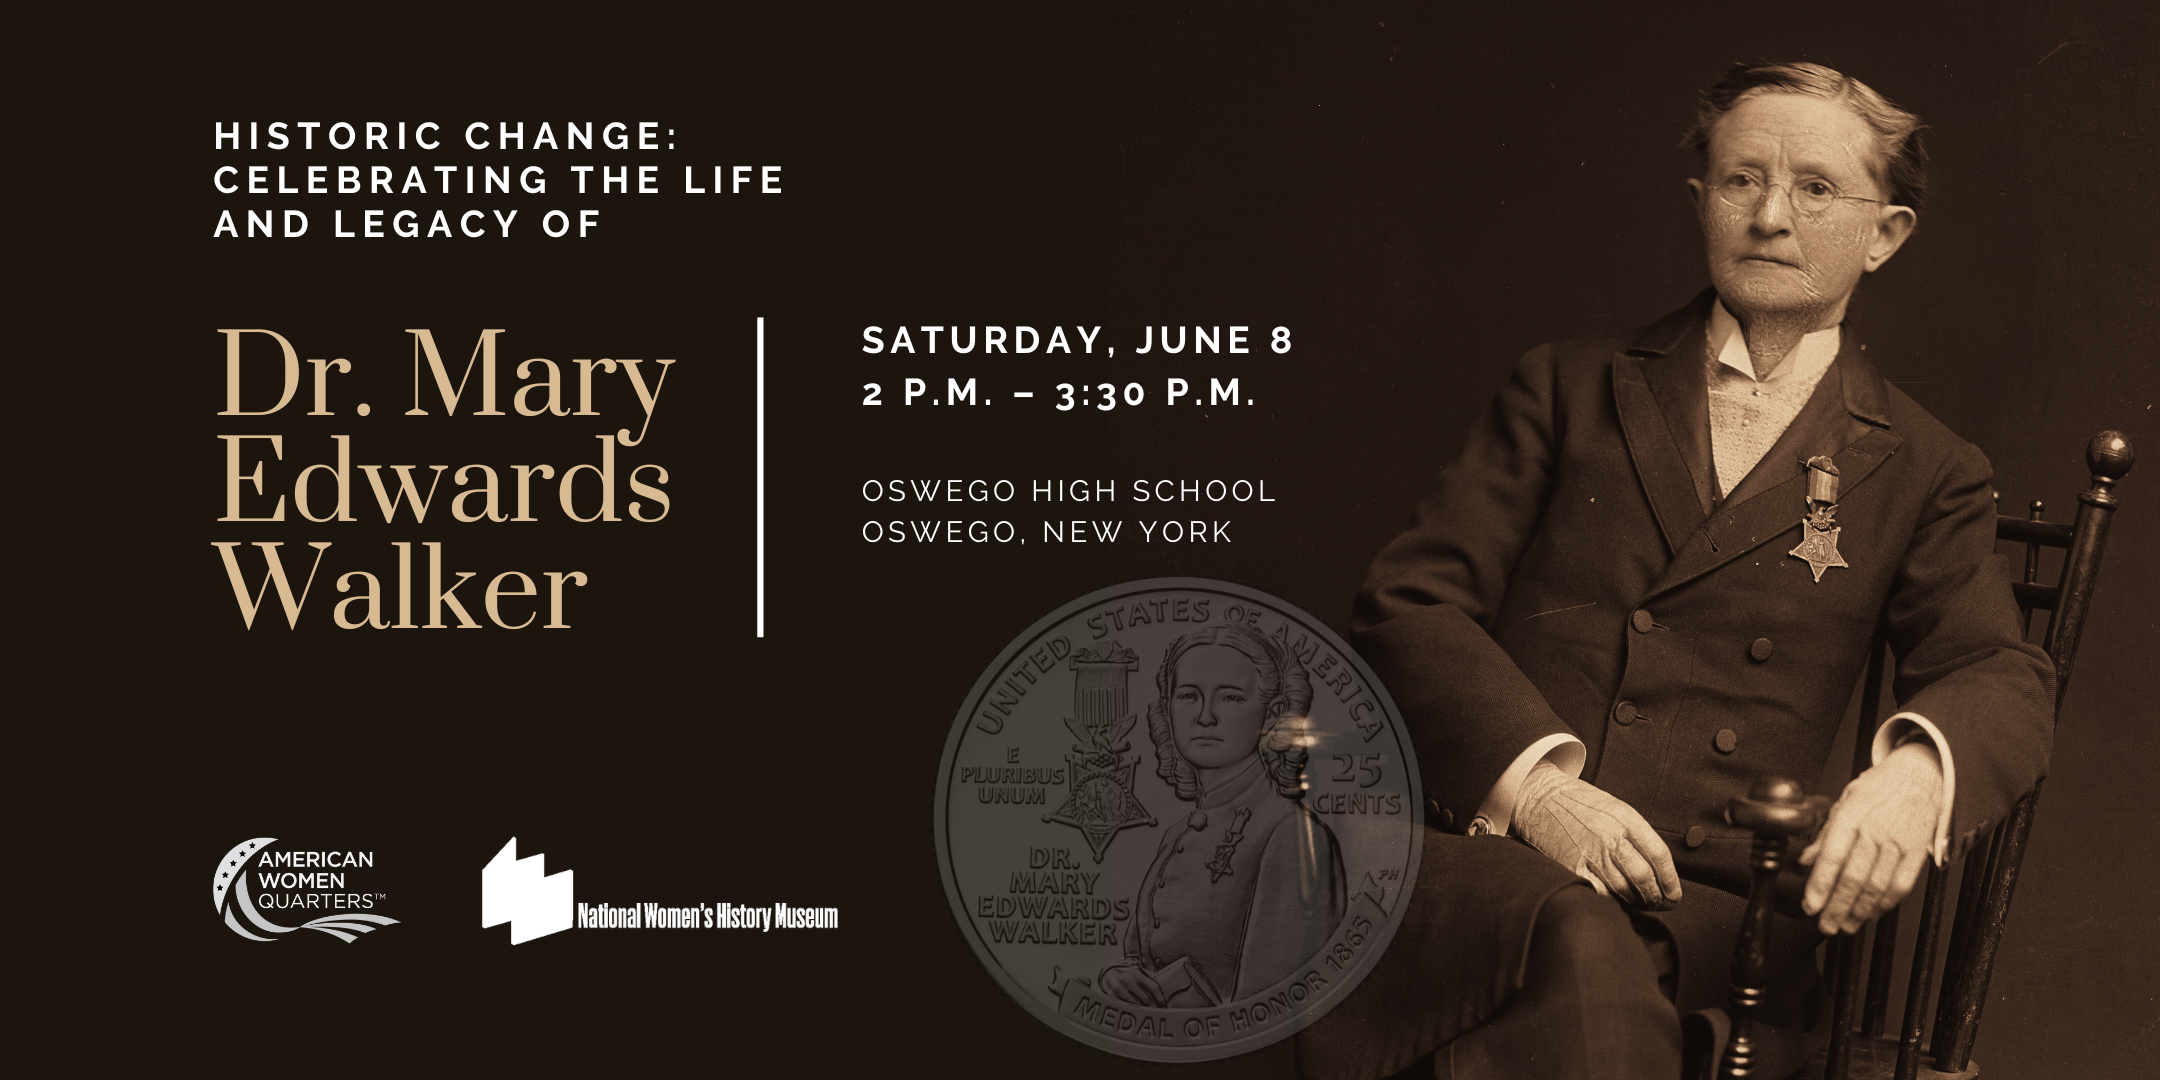 Sepia image of Dr. Mary Edwards Walker, seated, alongside image of new Walker quarter. Text has title and details of the event: Historic Change: Celebrating the Life and Legacy of Dr. Mary Edwards Walker. Saturday, June 8, 2 - 3:30 p.m. Oswego High School, Oswego NY. Image includes American Women Quarters logo and National Women's History Museum logo.